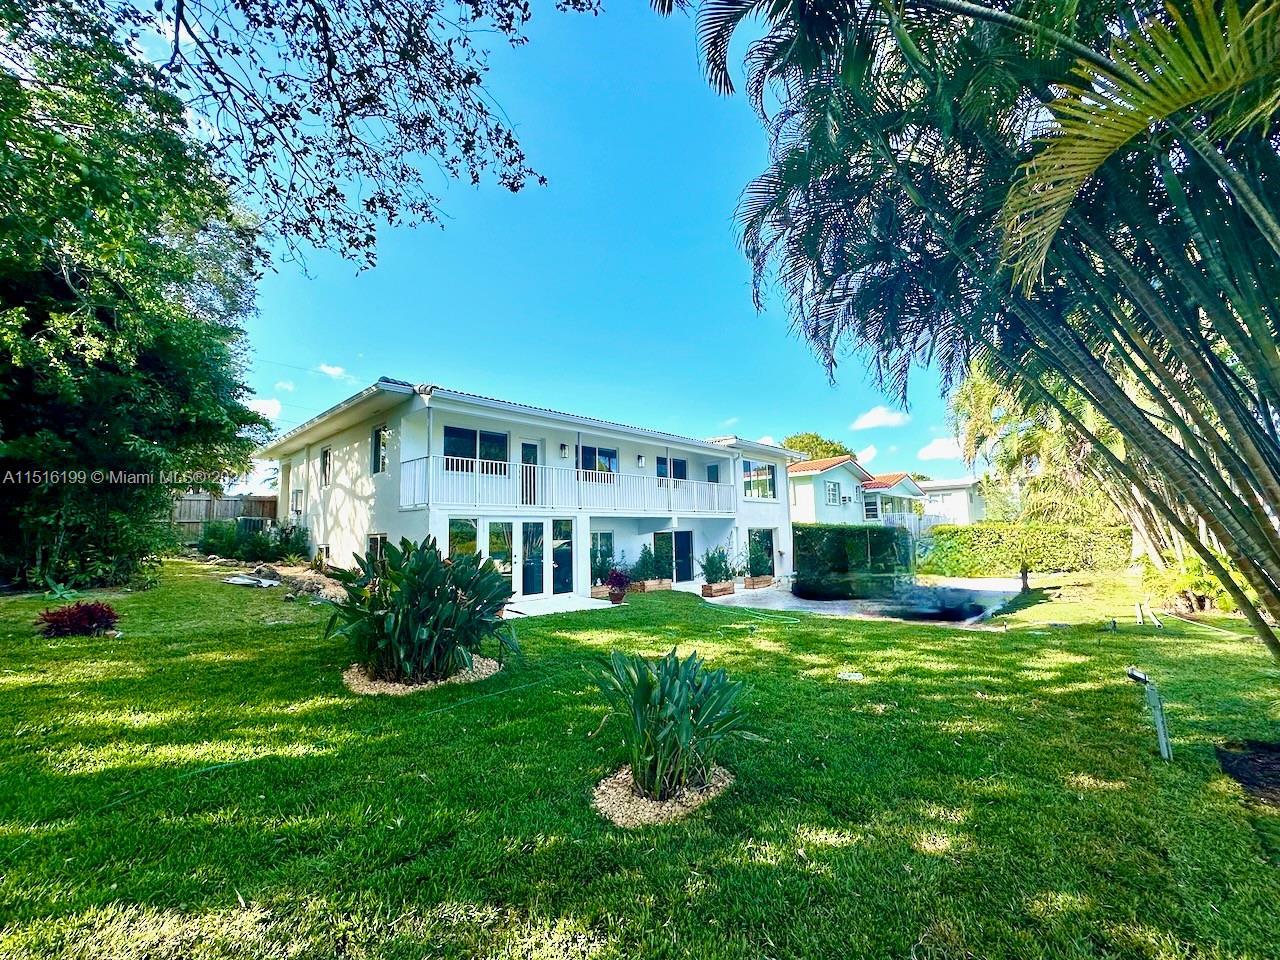 Miami Shores Lake WATERFRONT 4 bed 2/1 baths lake house with 3 bedroom 2 bath on 2nd floor and very 